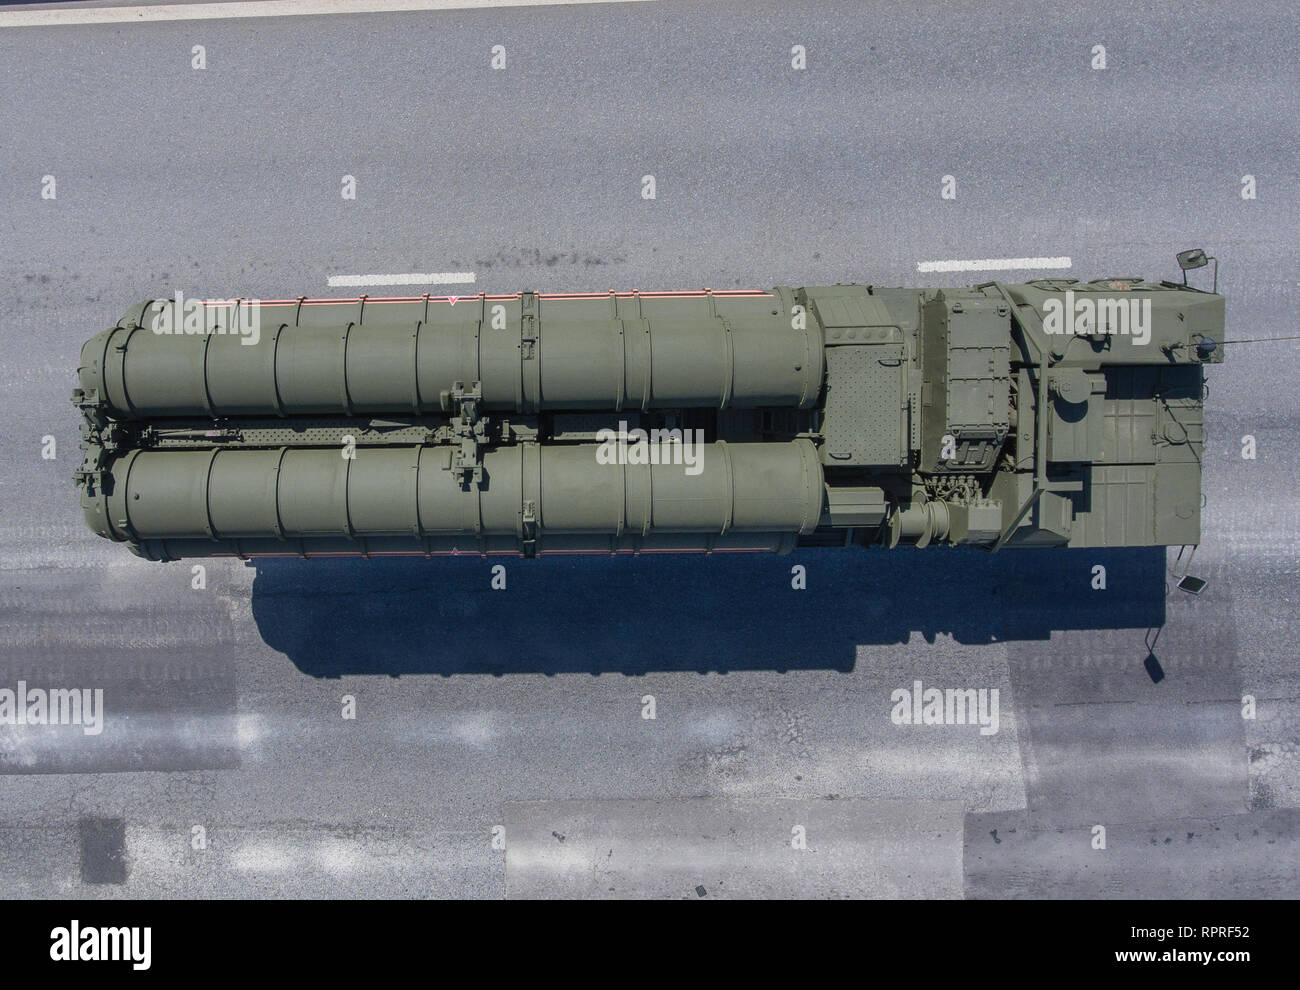 Moscow, May 9, 2018. S-400 Triumf launch vehicle on the chassis of MZKT-543M returns from the Red Square after the Victory Day Parade, top view. Stock Photo